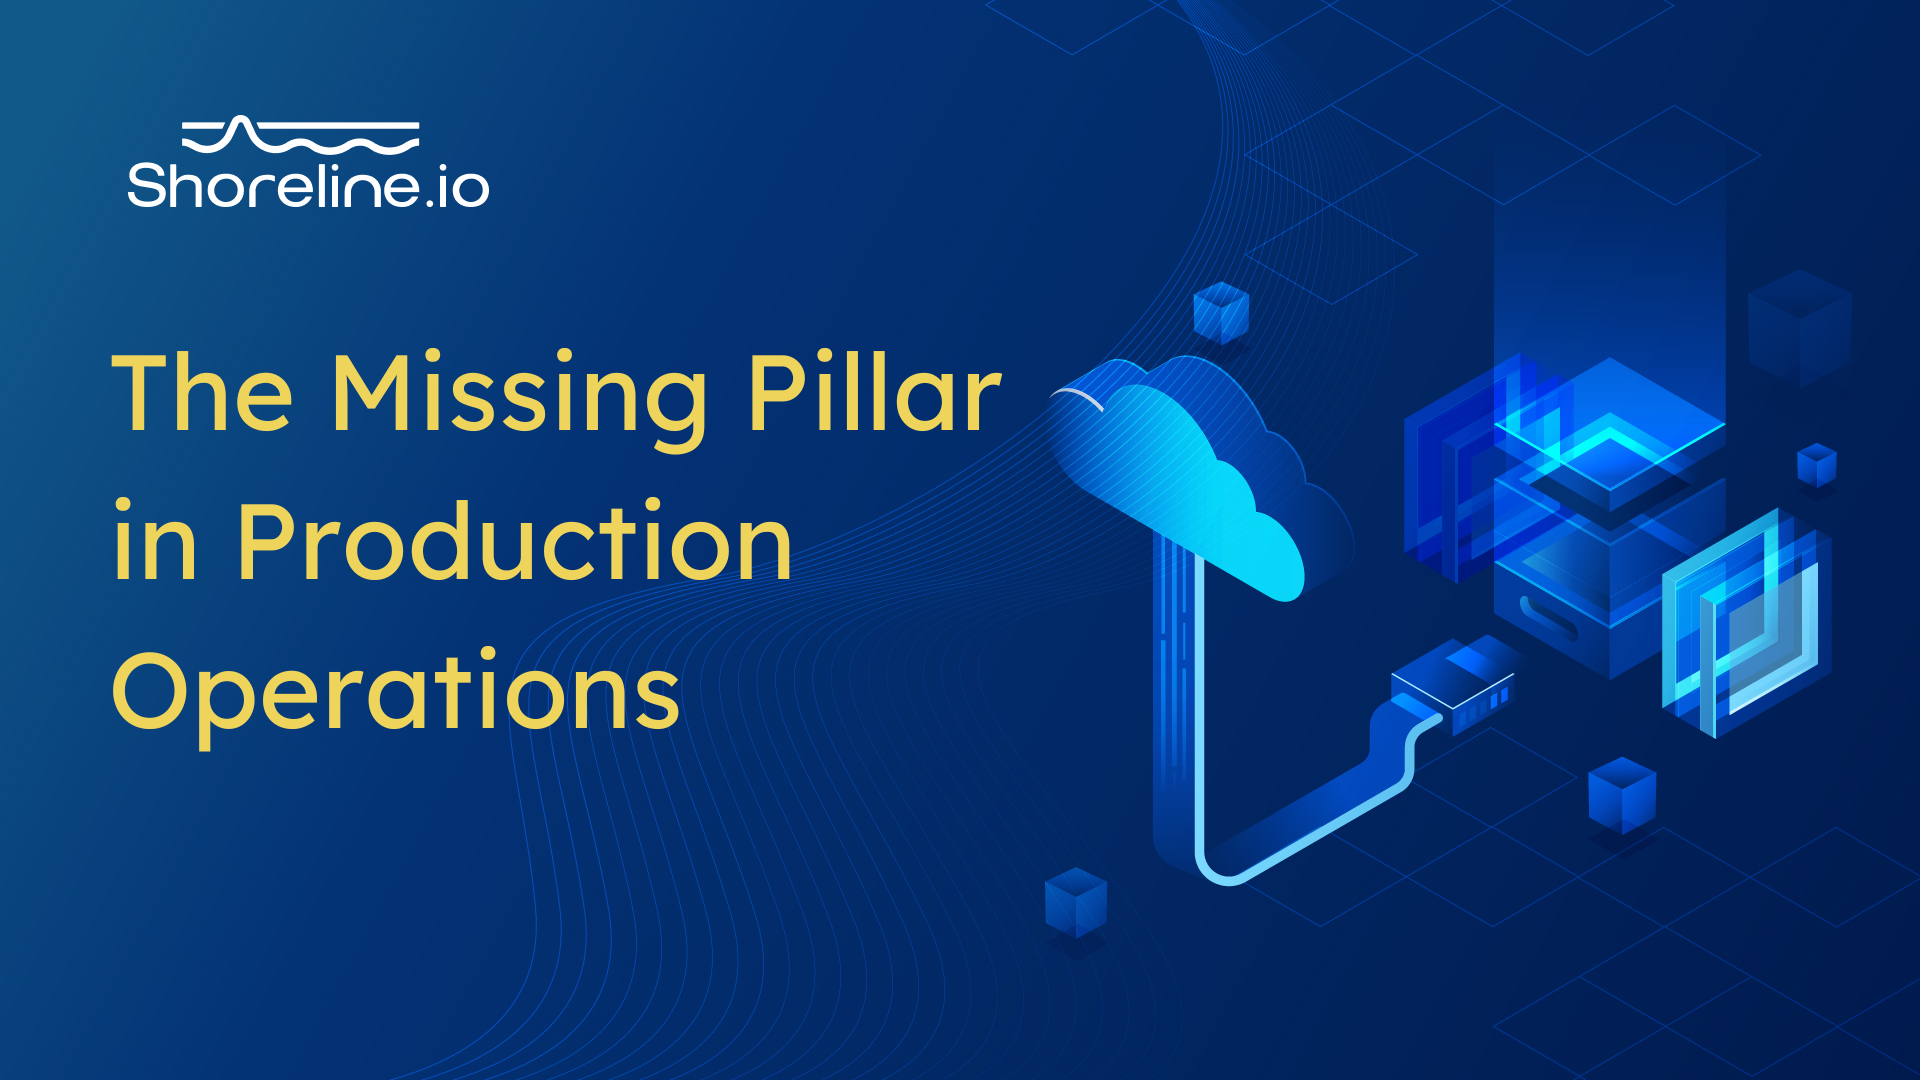 The missing pillar in production operations